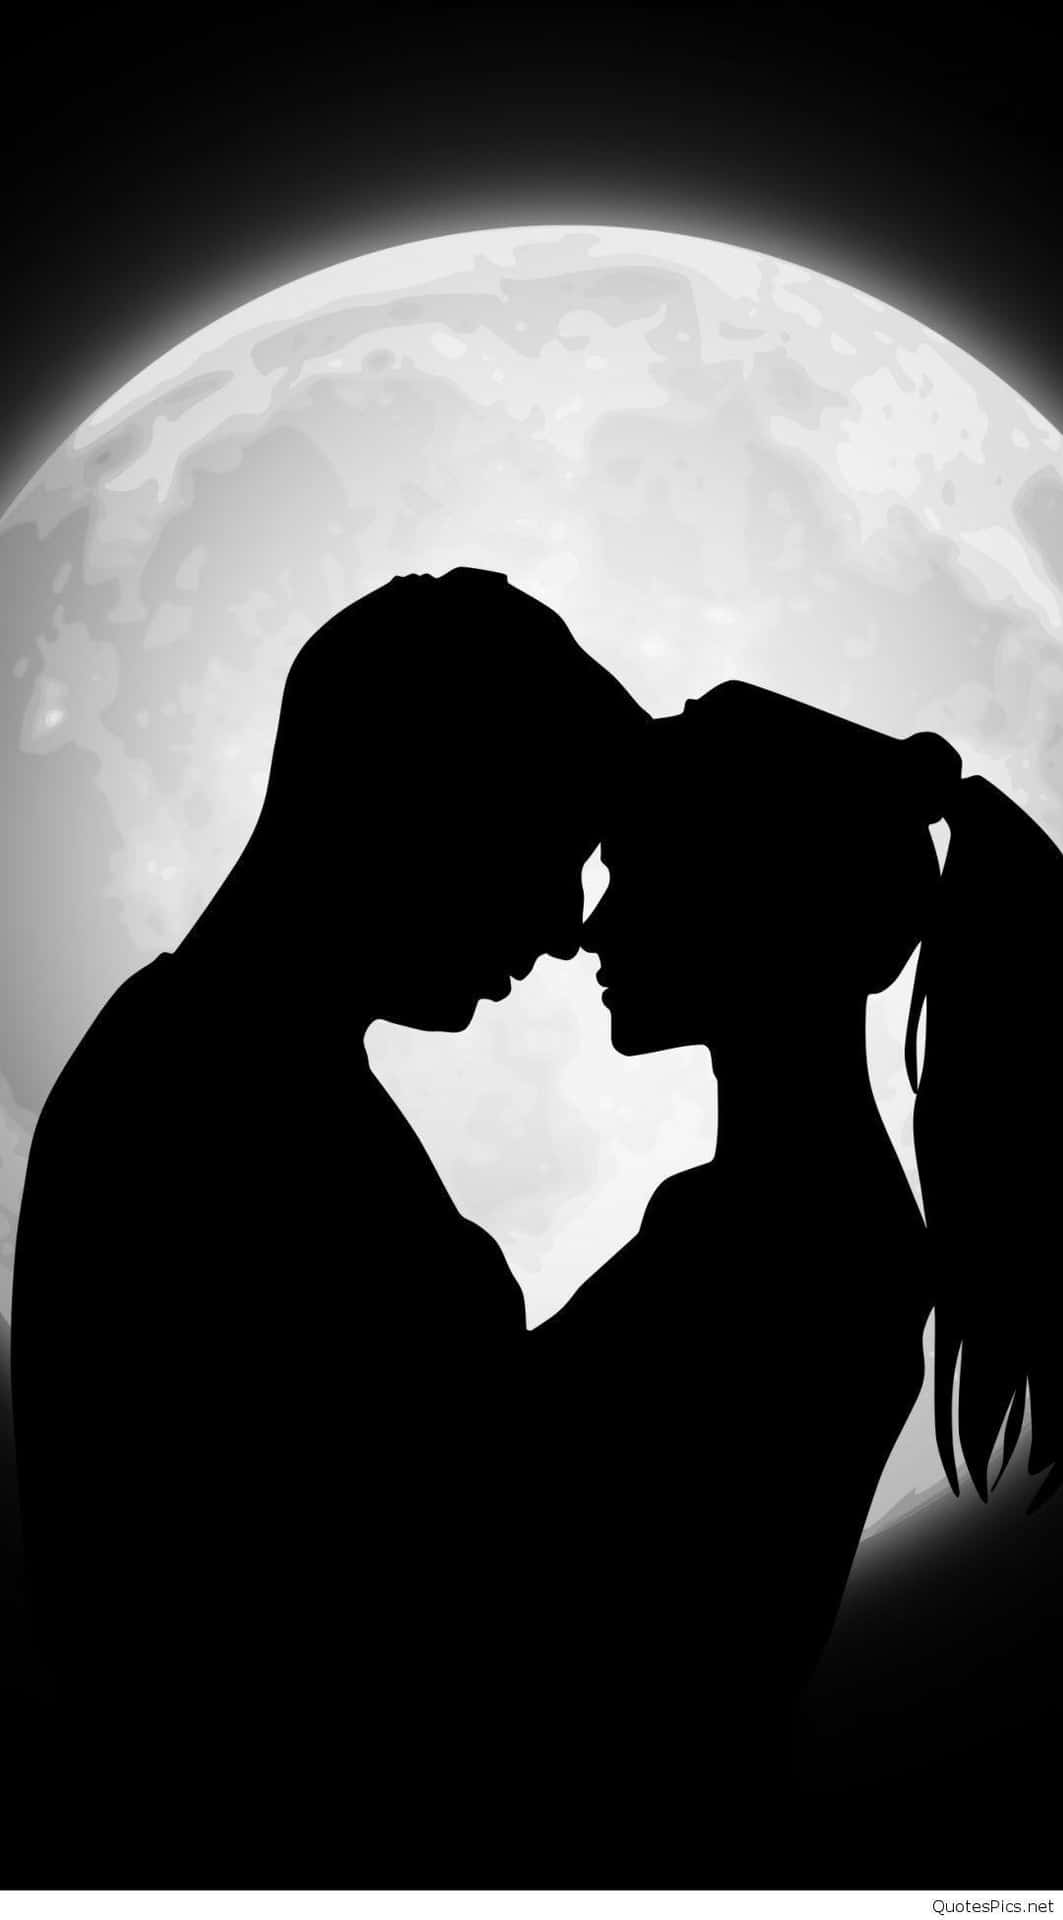 Moon Silhouette Relationship Cute Couple Pictures